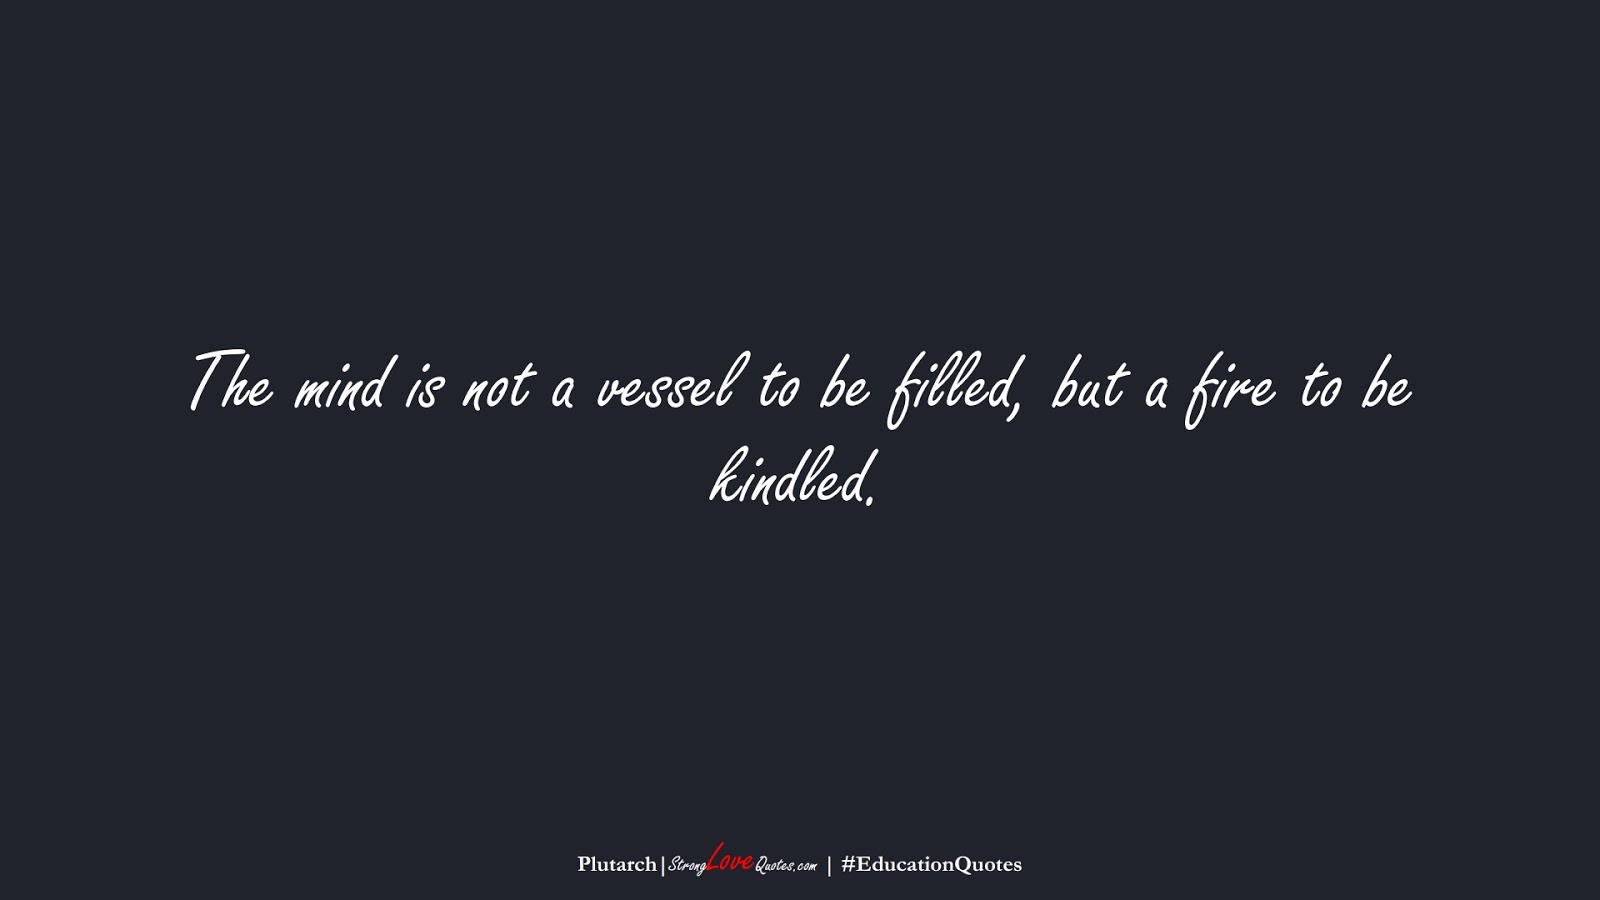 The mind is not a vessel to be filled, but a fire to be kindled. (Plutarch);  #EducationQuotes